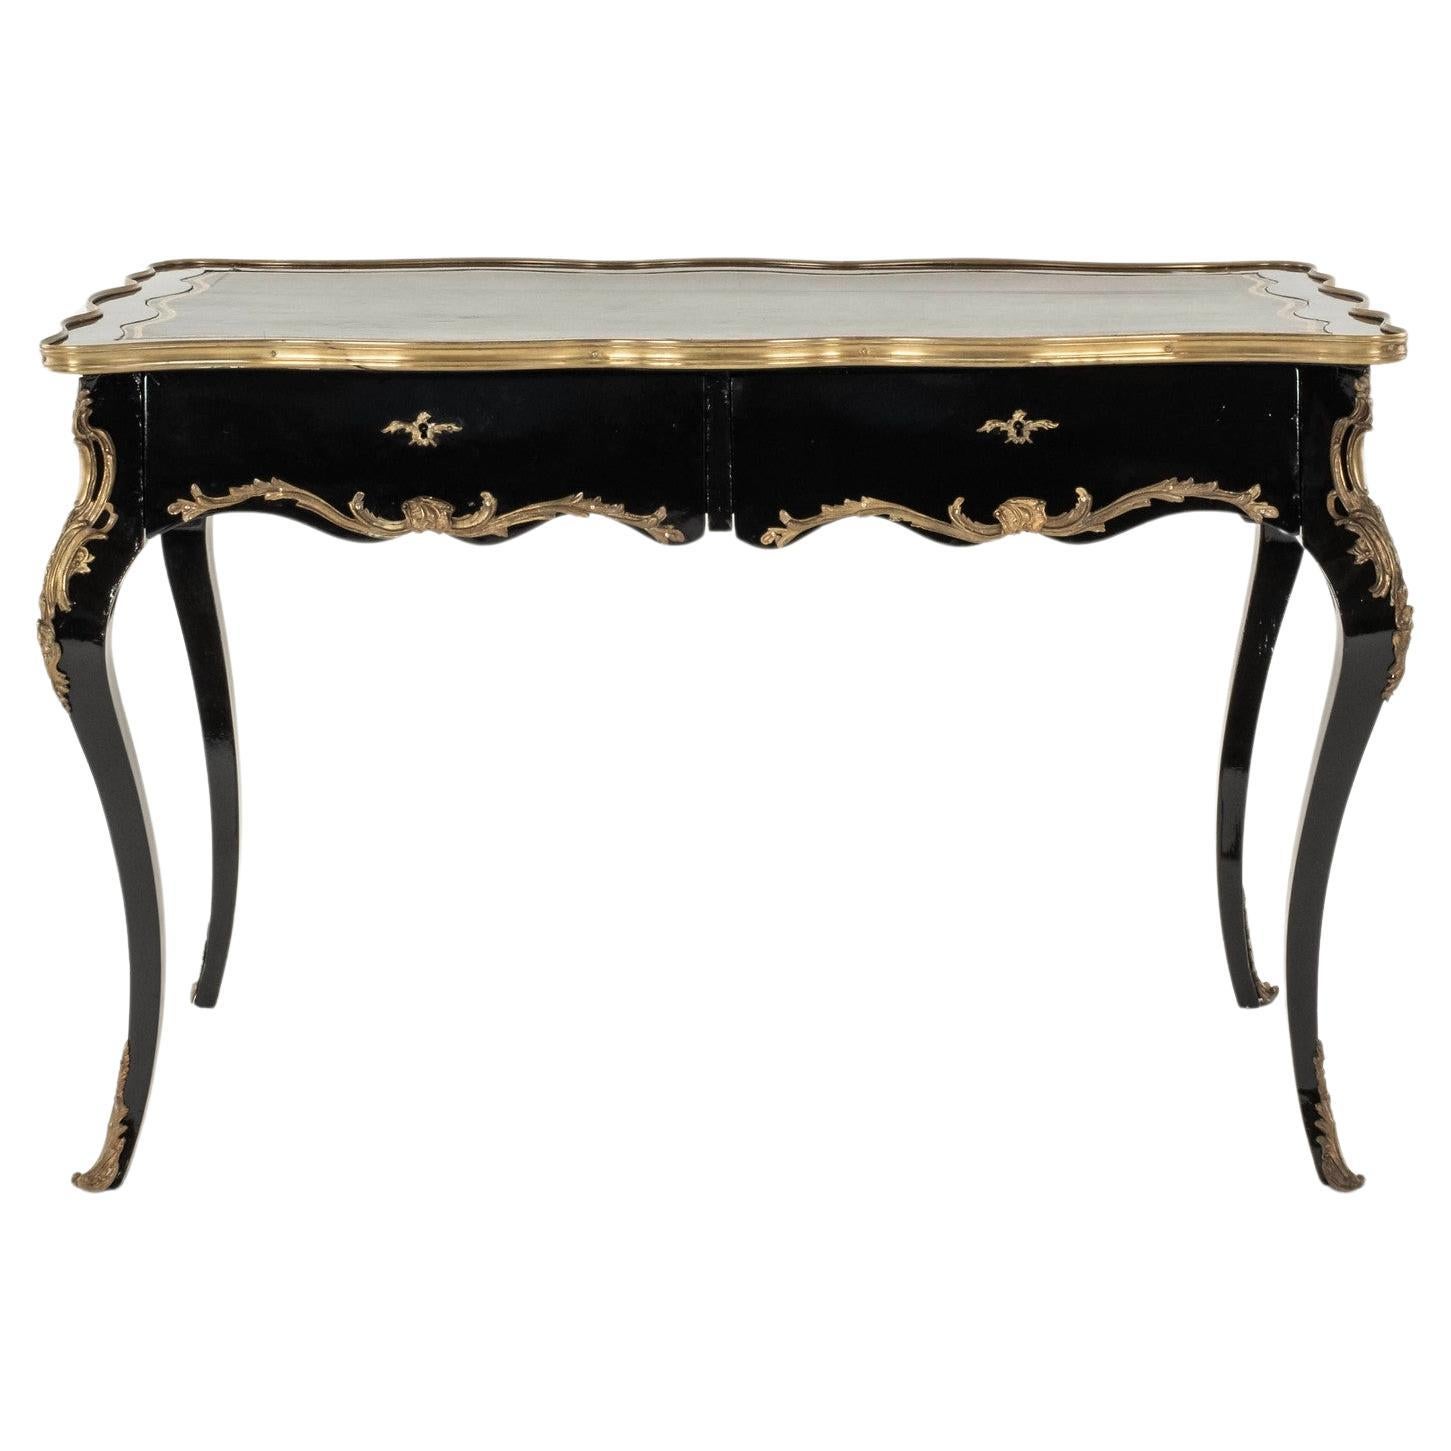 19th Century French Louis XV Style Bureau Plat For Sale